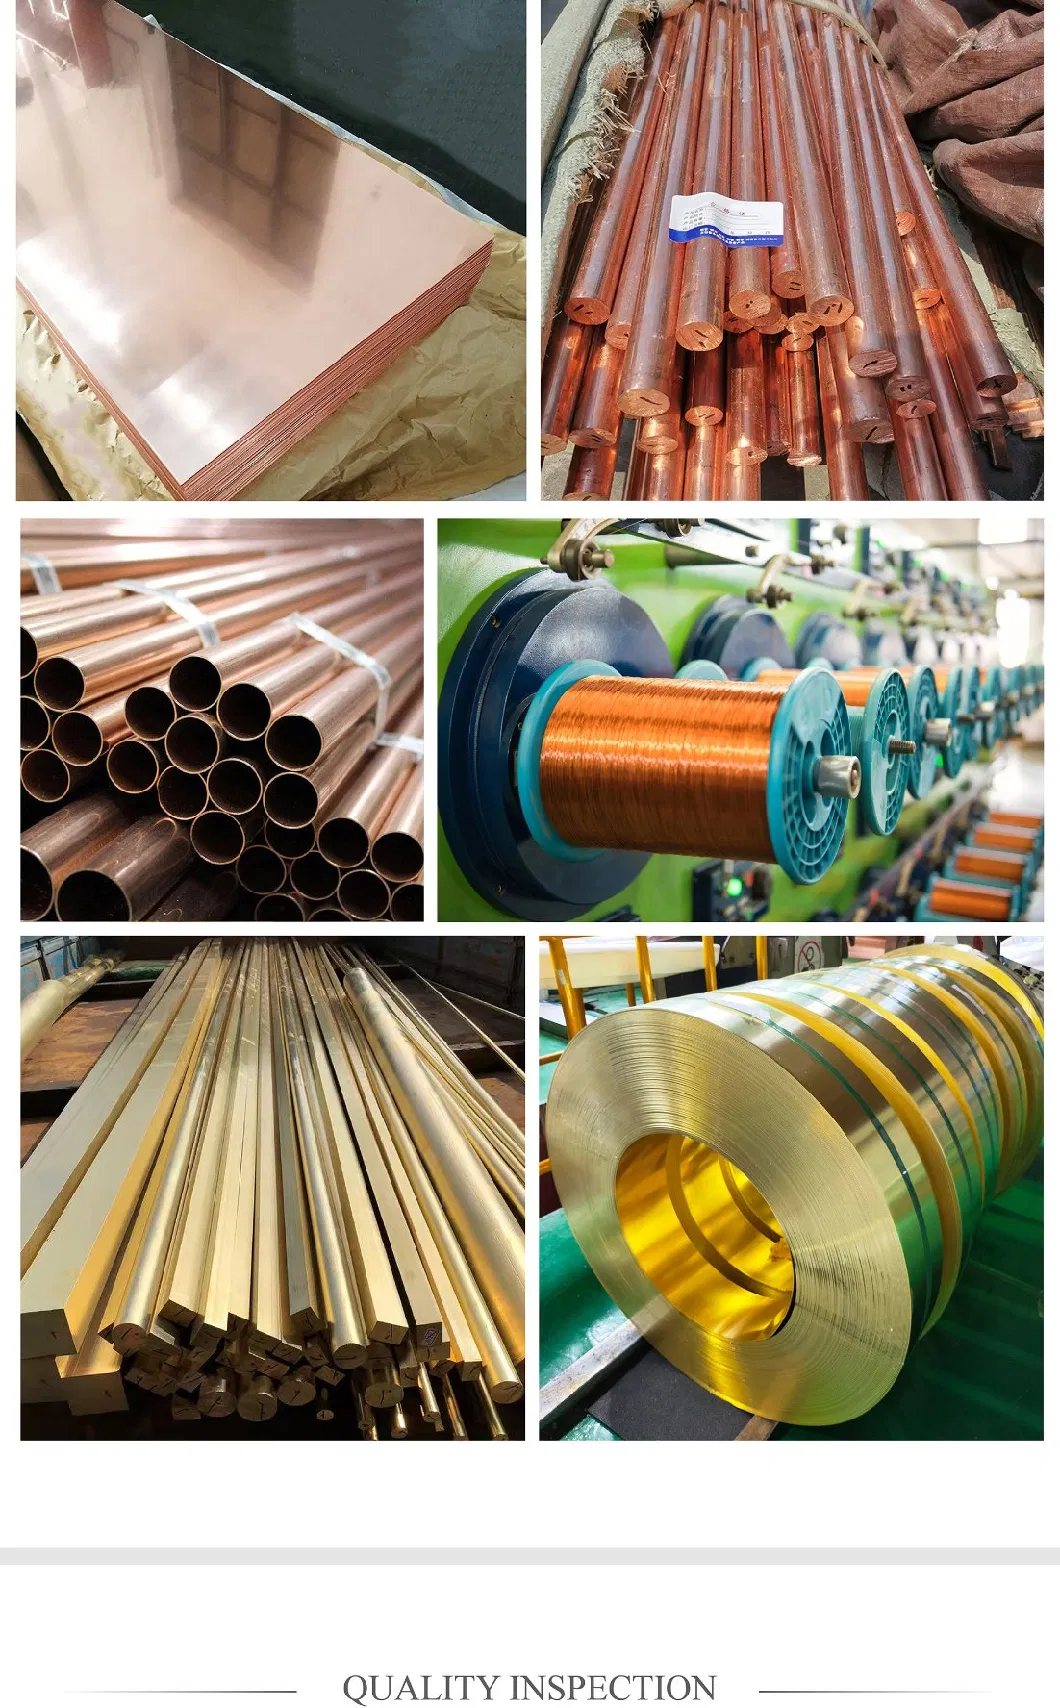 ASTM B187 Pure Copper Round Bar 3 mm 4 mm 8 mm 16 mm T2 99.99% Copper Rod for Sale